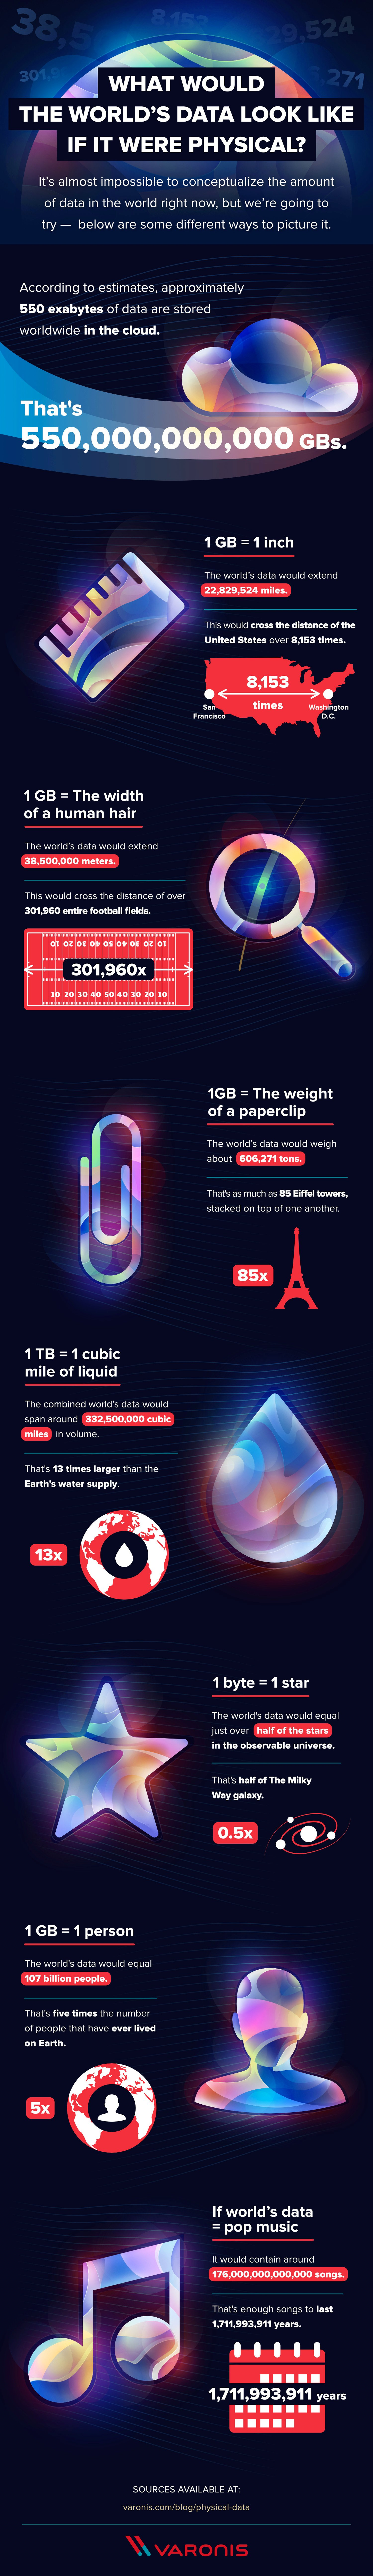 if worlds data were phyiscal infographic